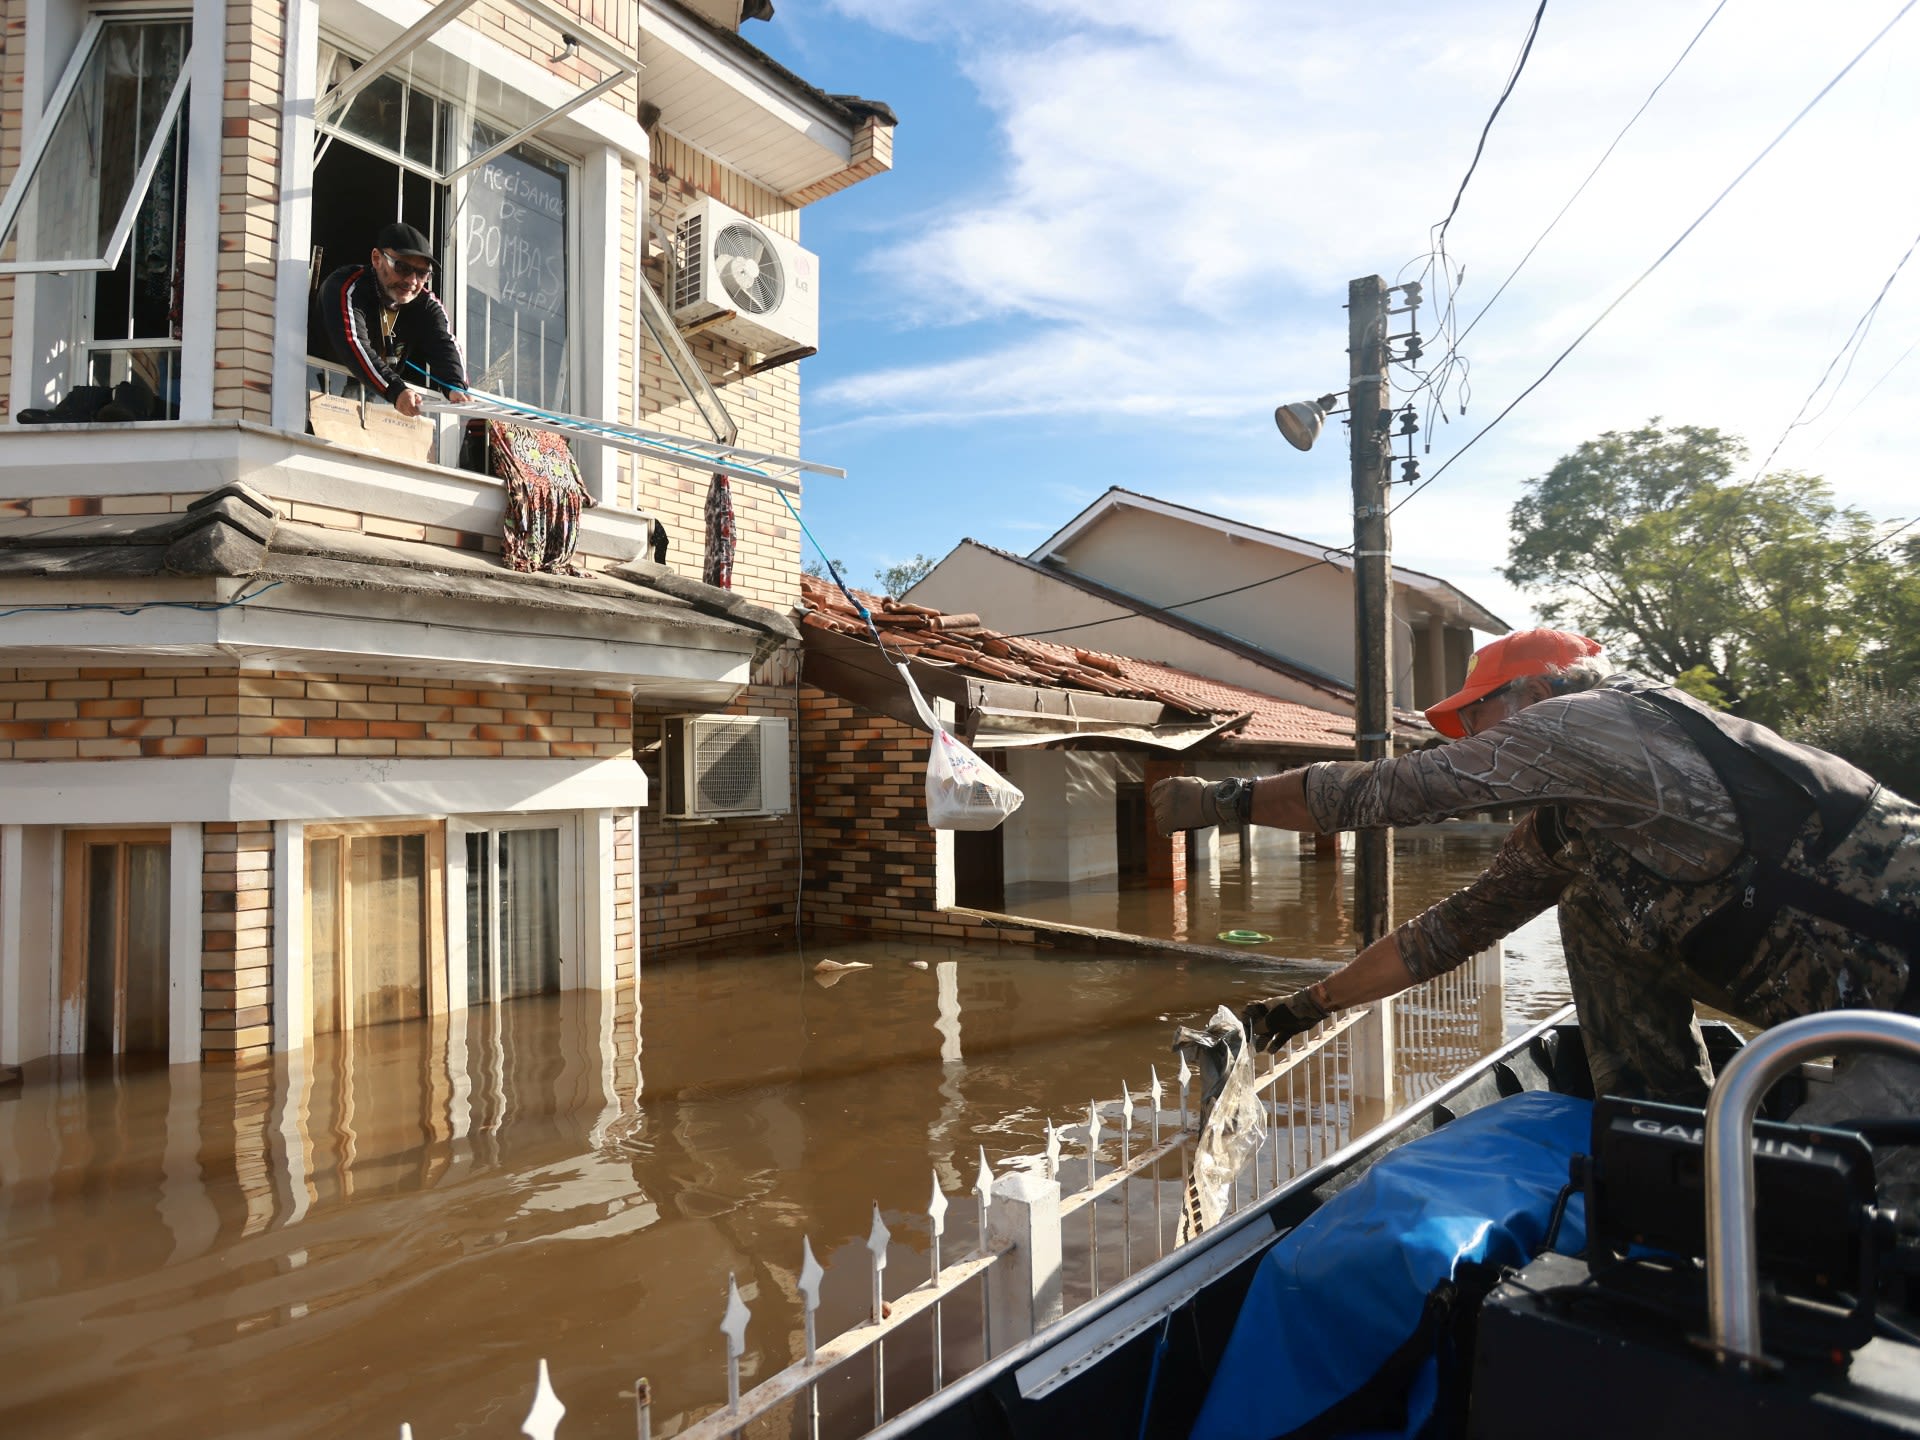 As Brazil copes with floods, officials face another scourge: Disinformation